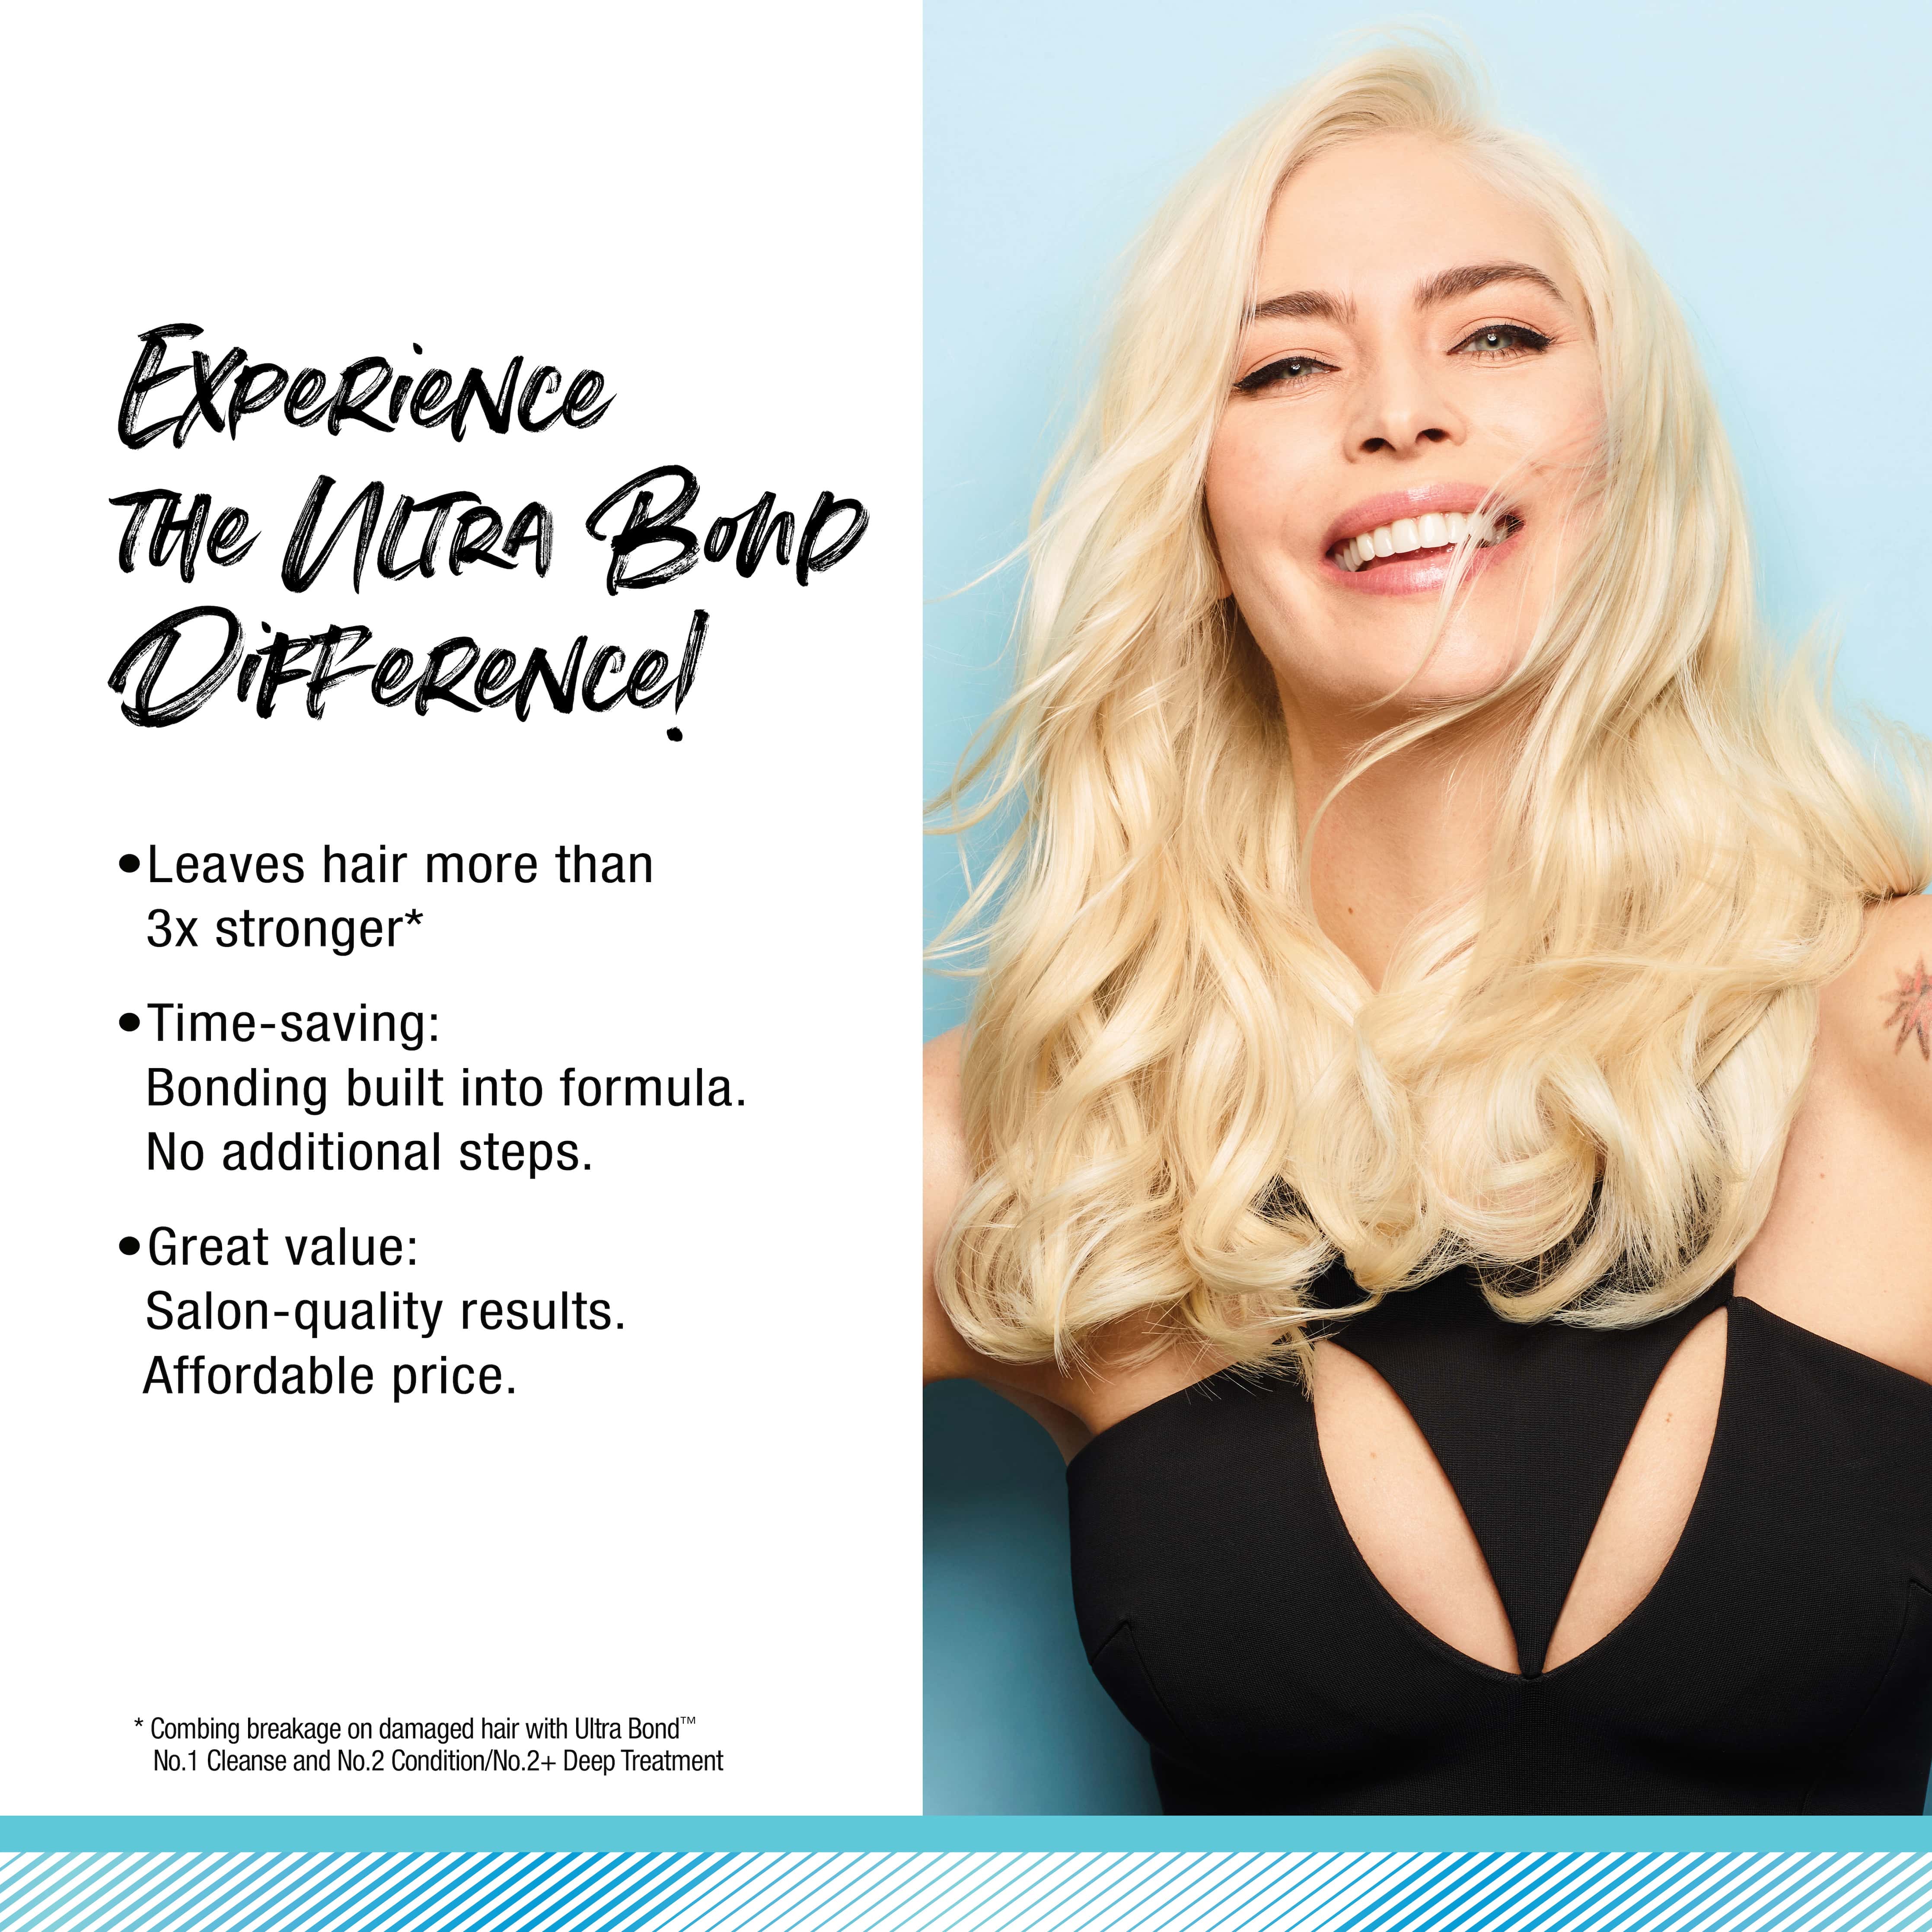 Experience the ultra bond difference! Salon quality results, affordable price.